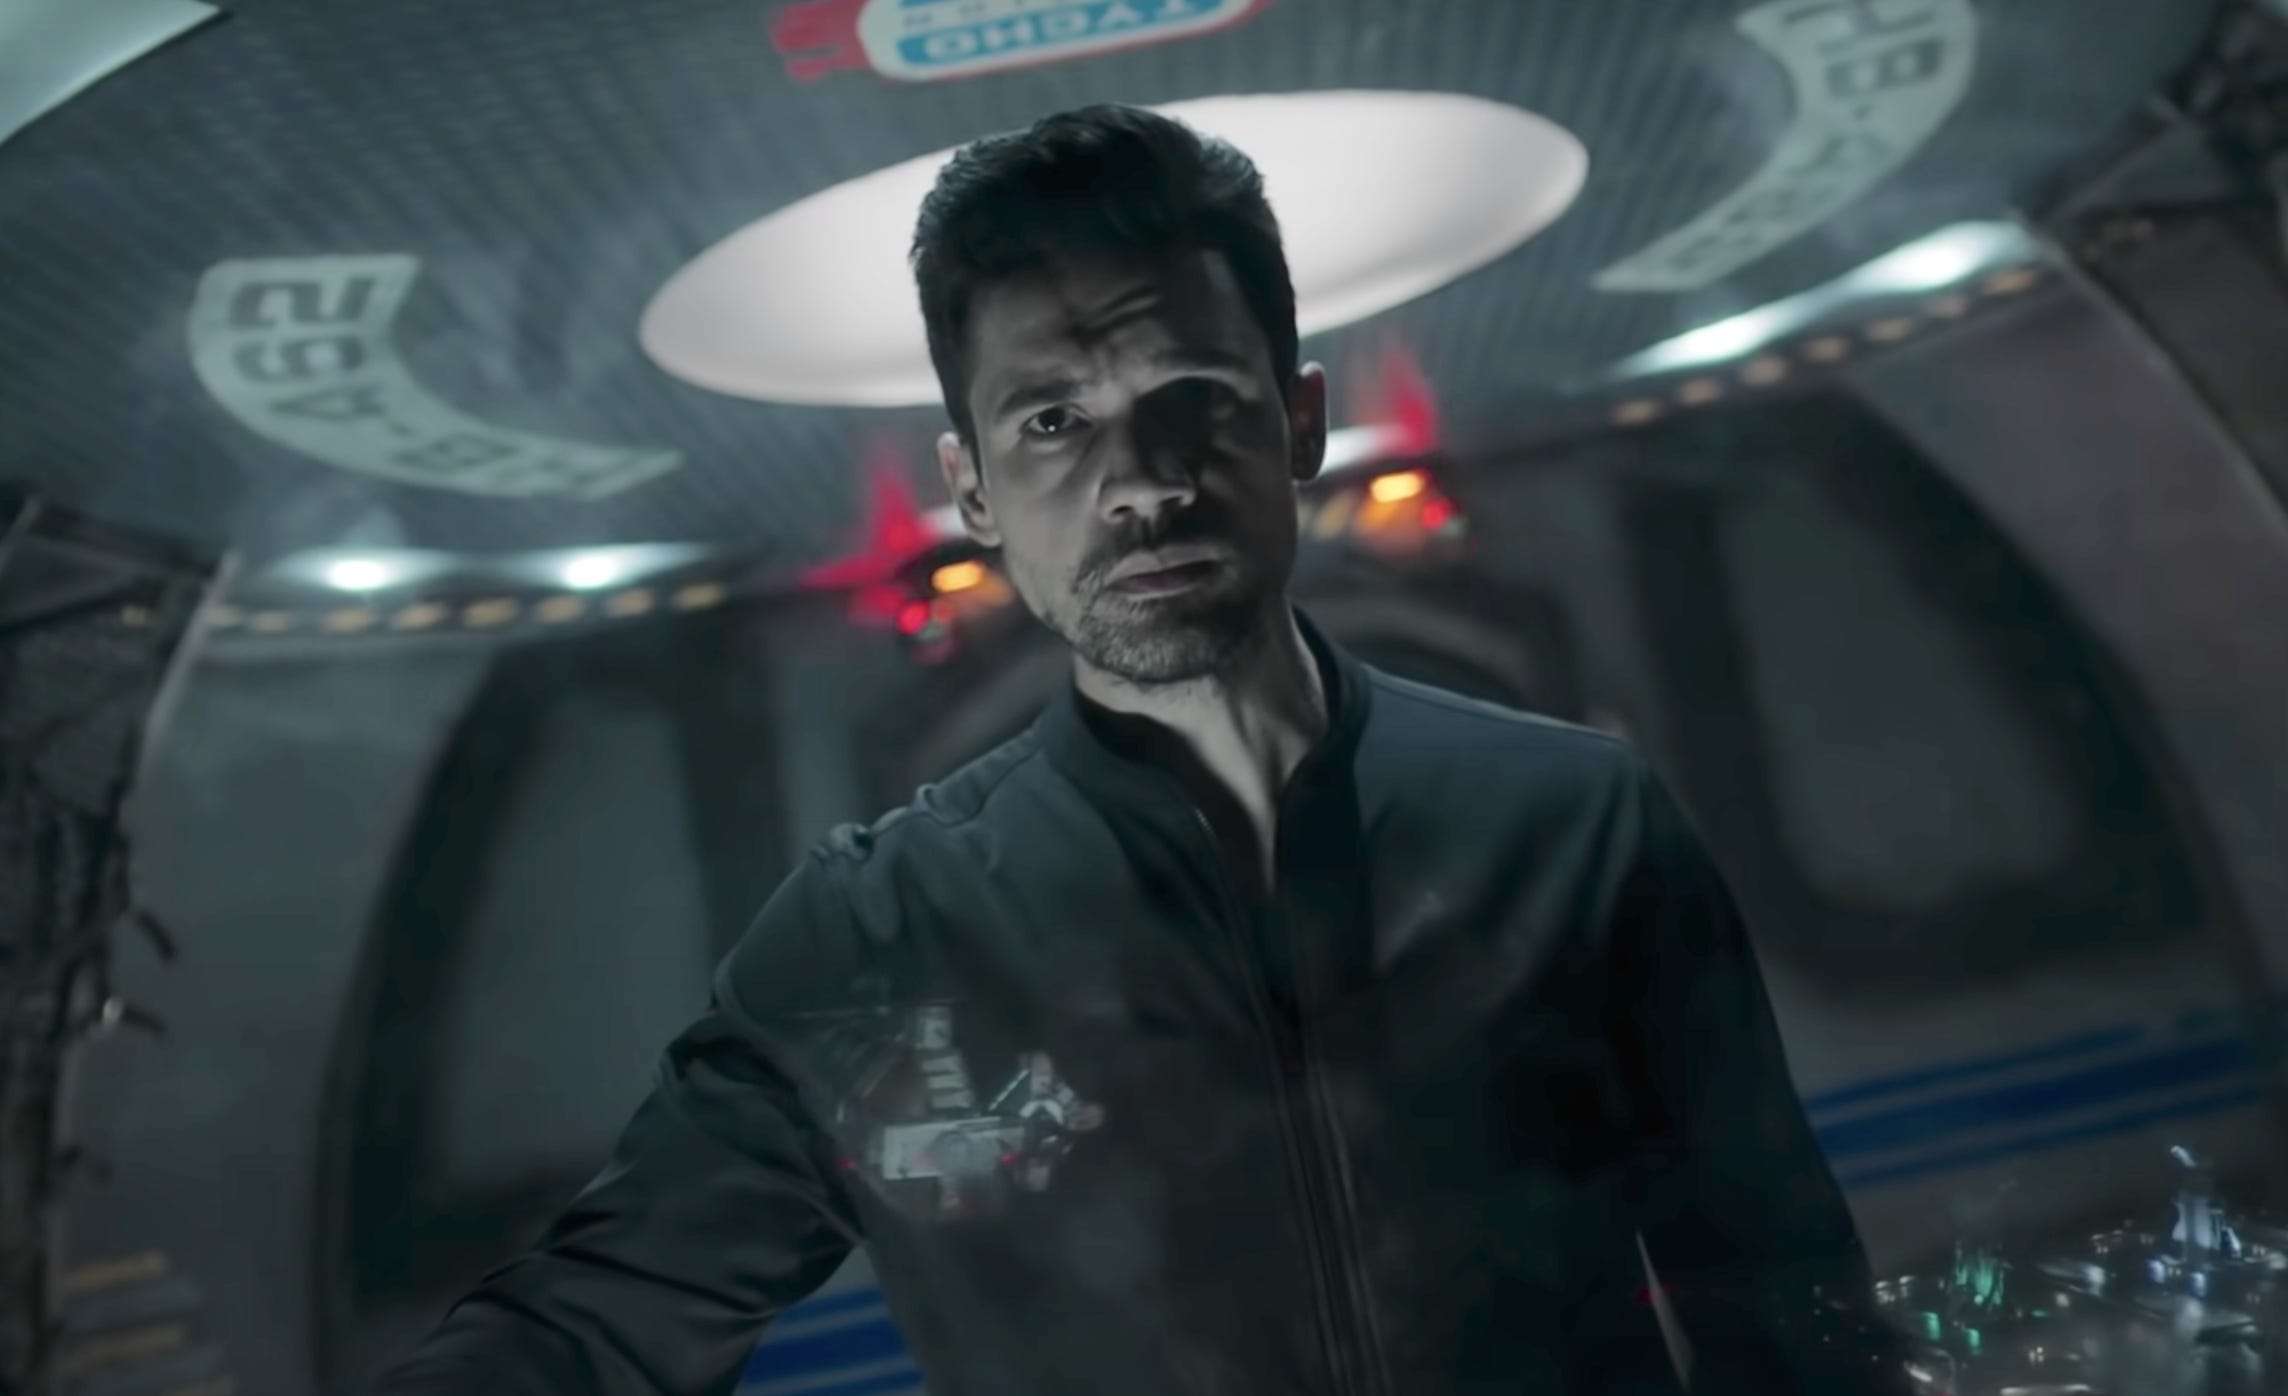 The Expanse' showrunner says season 5 sets up a series ending, but